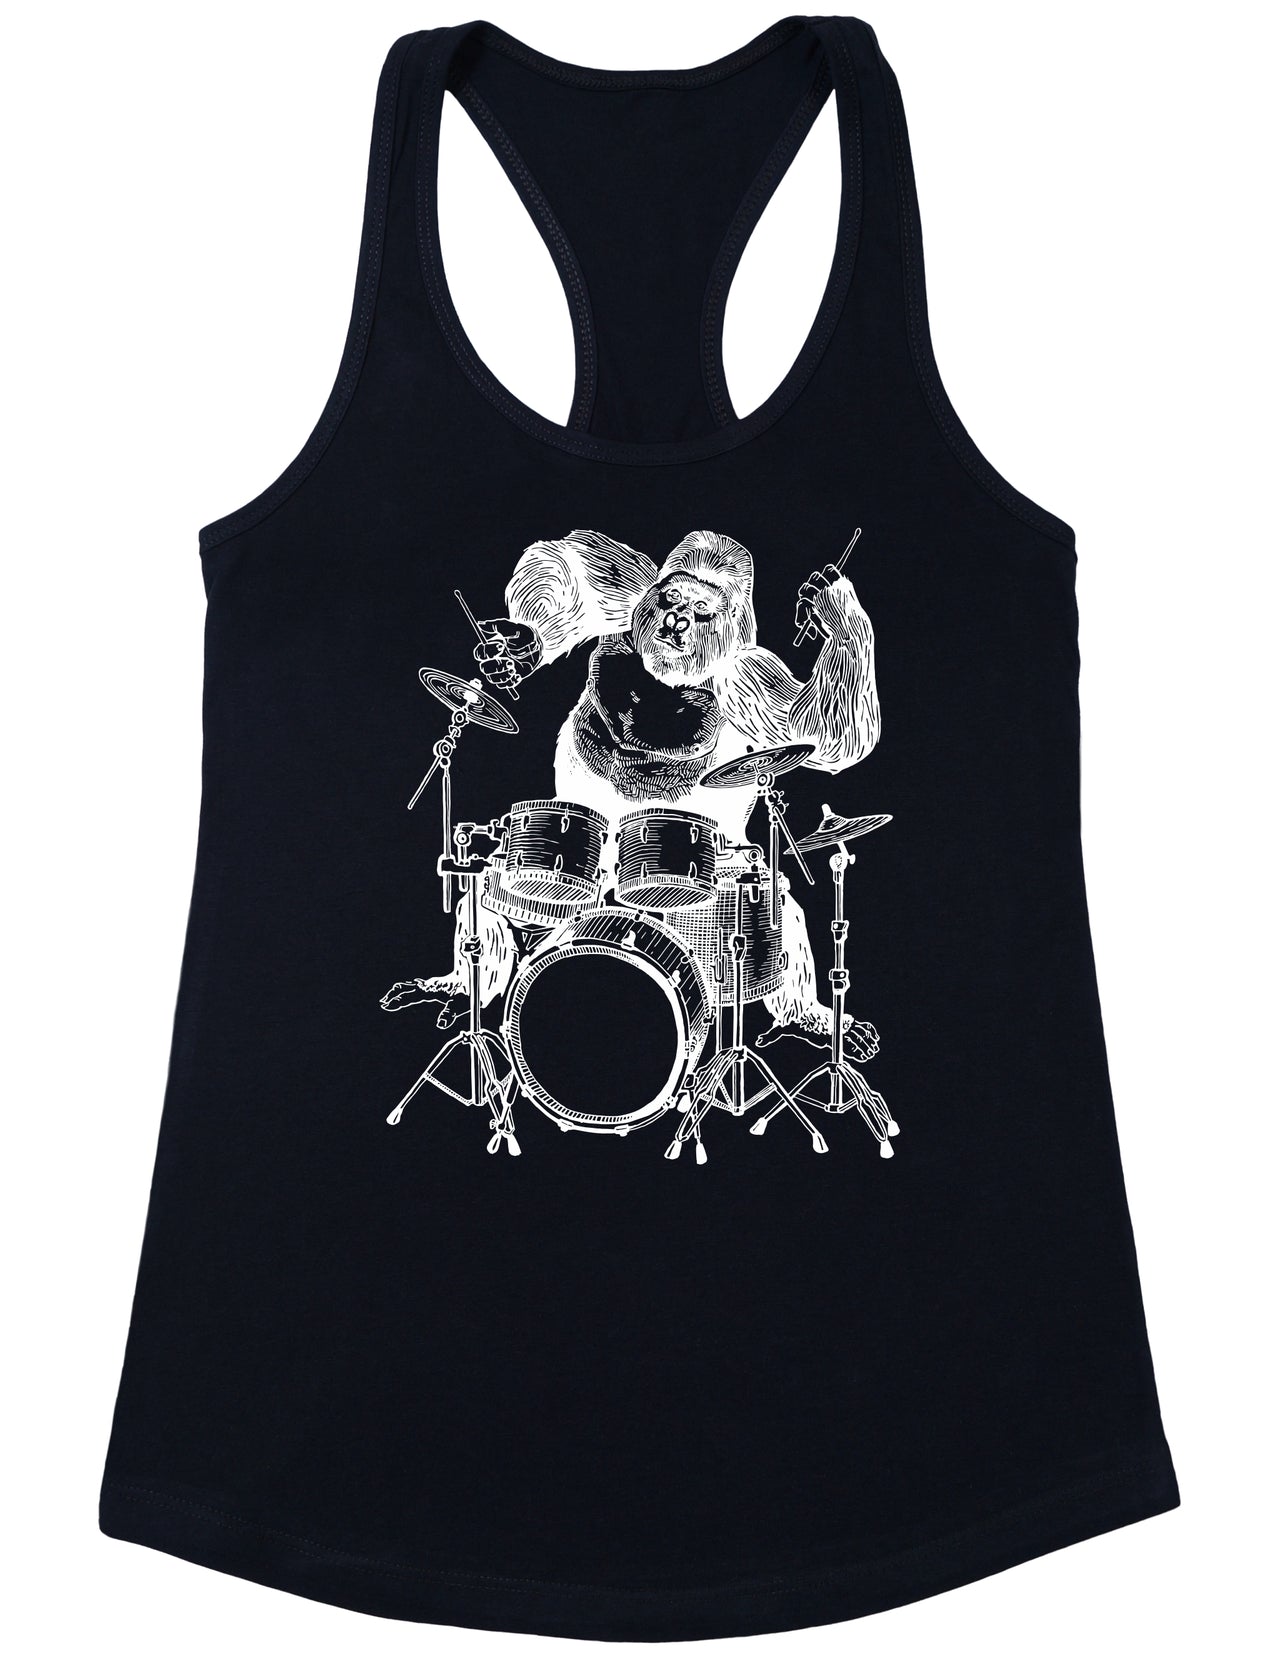 SEEMBO Gorilla Playing Drums Funny Drummer Drumming Mujeres Polialgodón Tank Top 